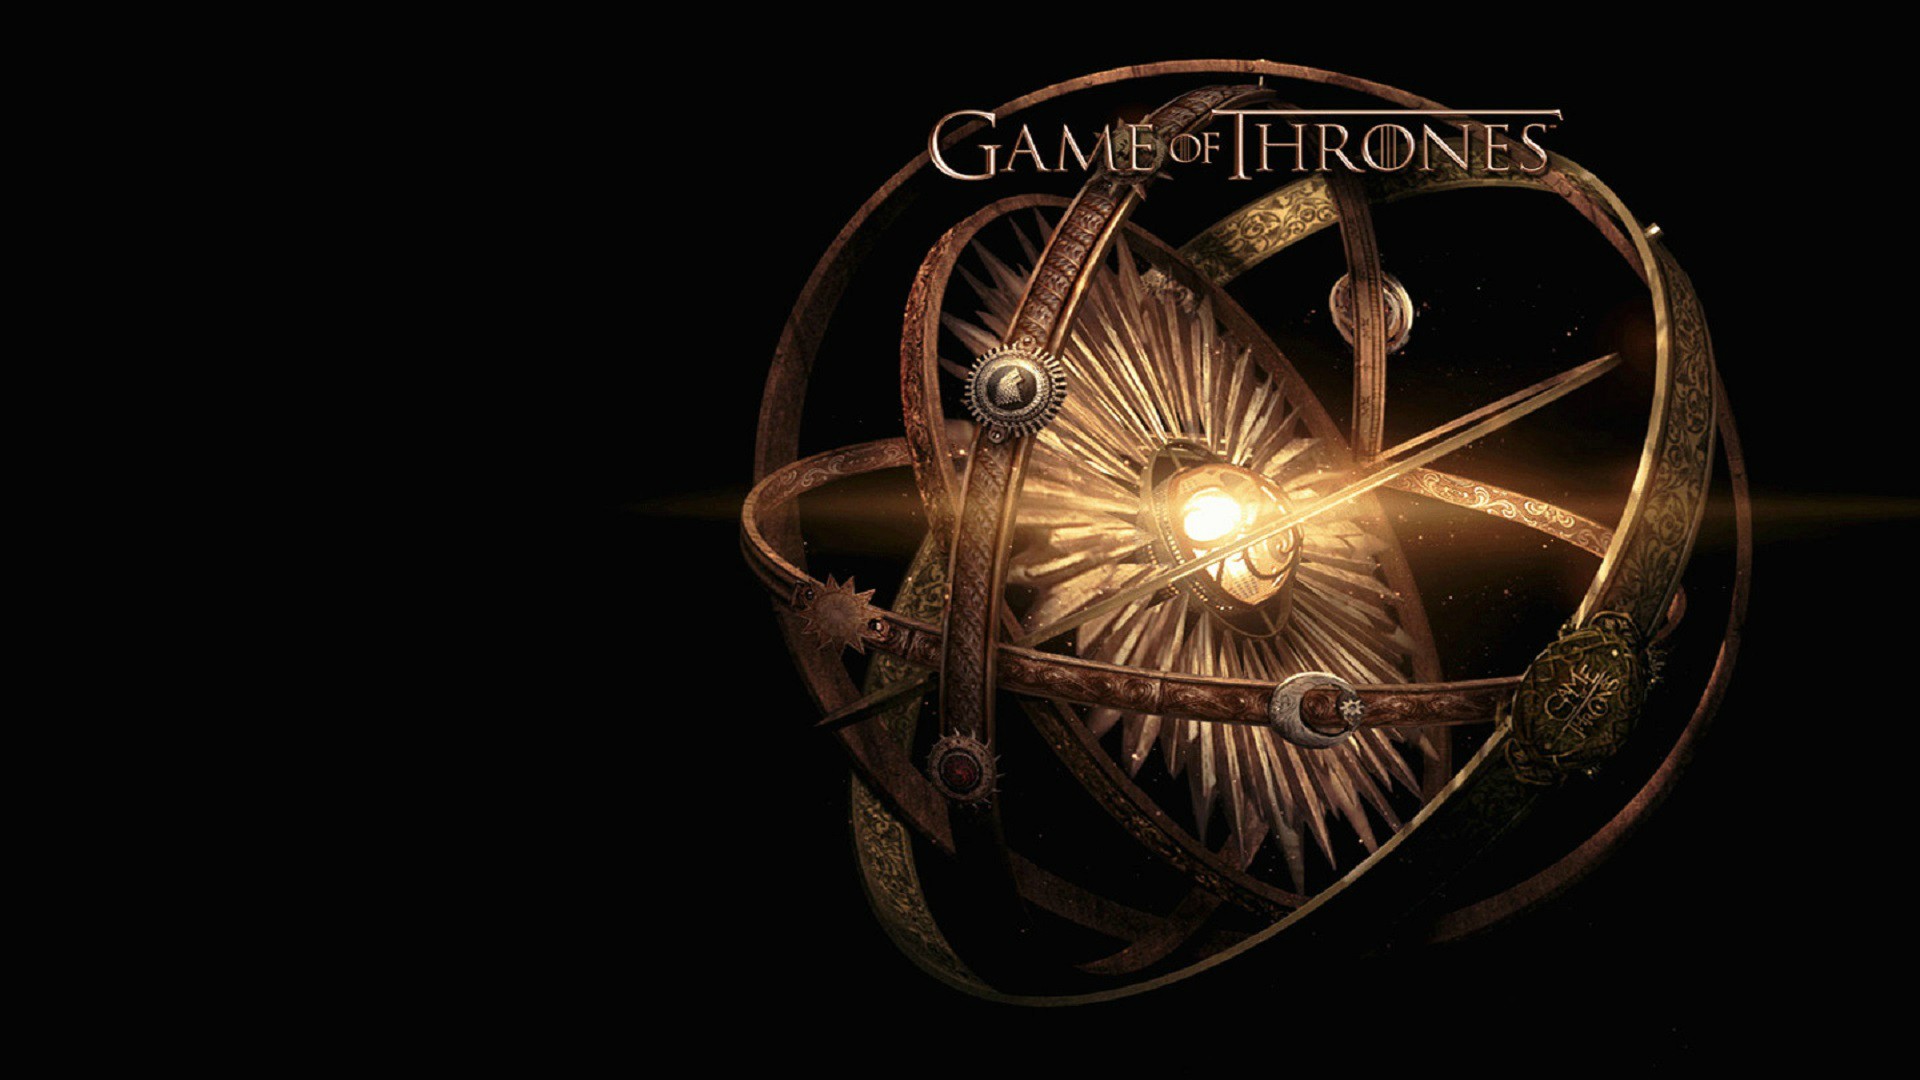 Game of Thrones - A Telltale Games Series Wallpapers